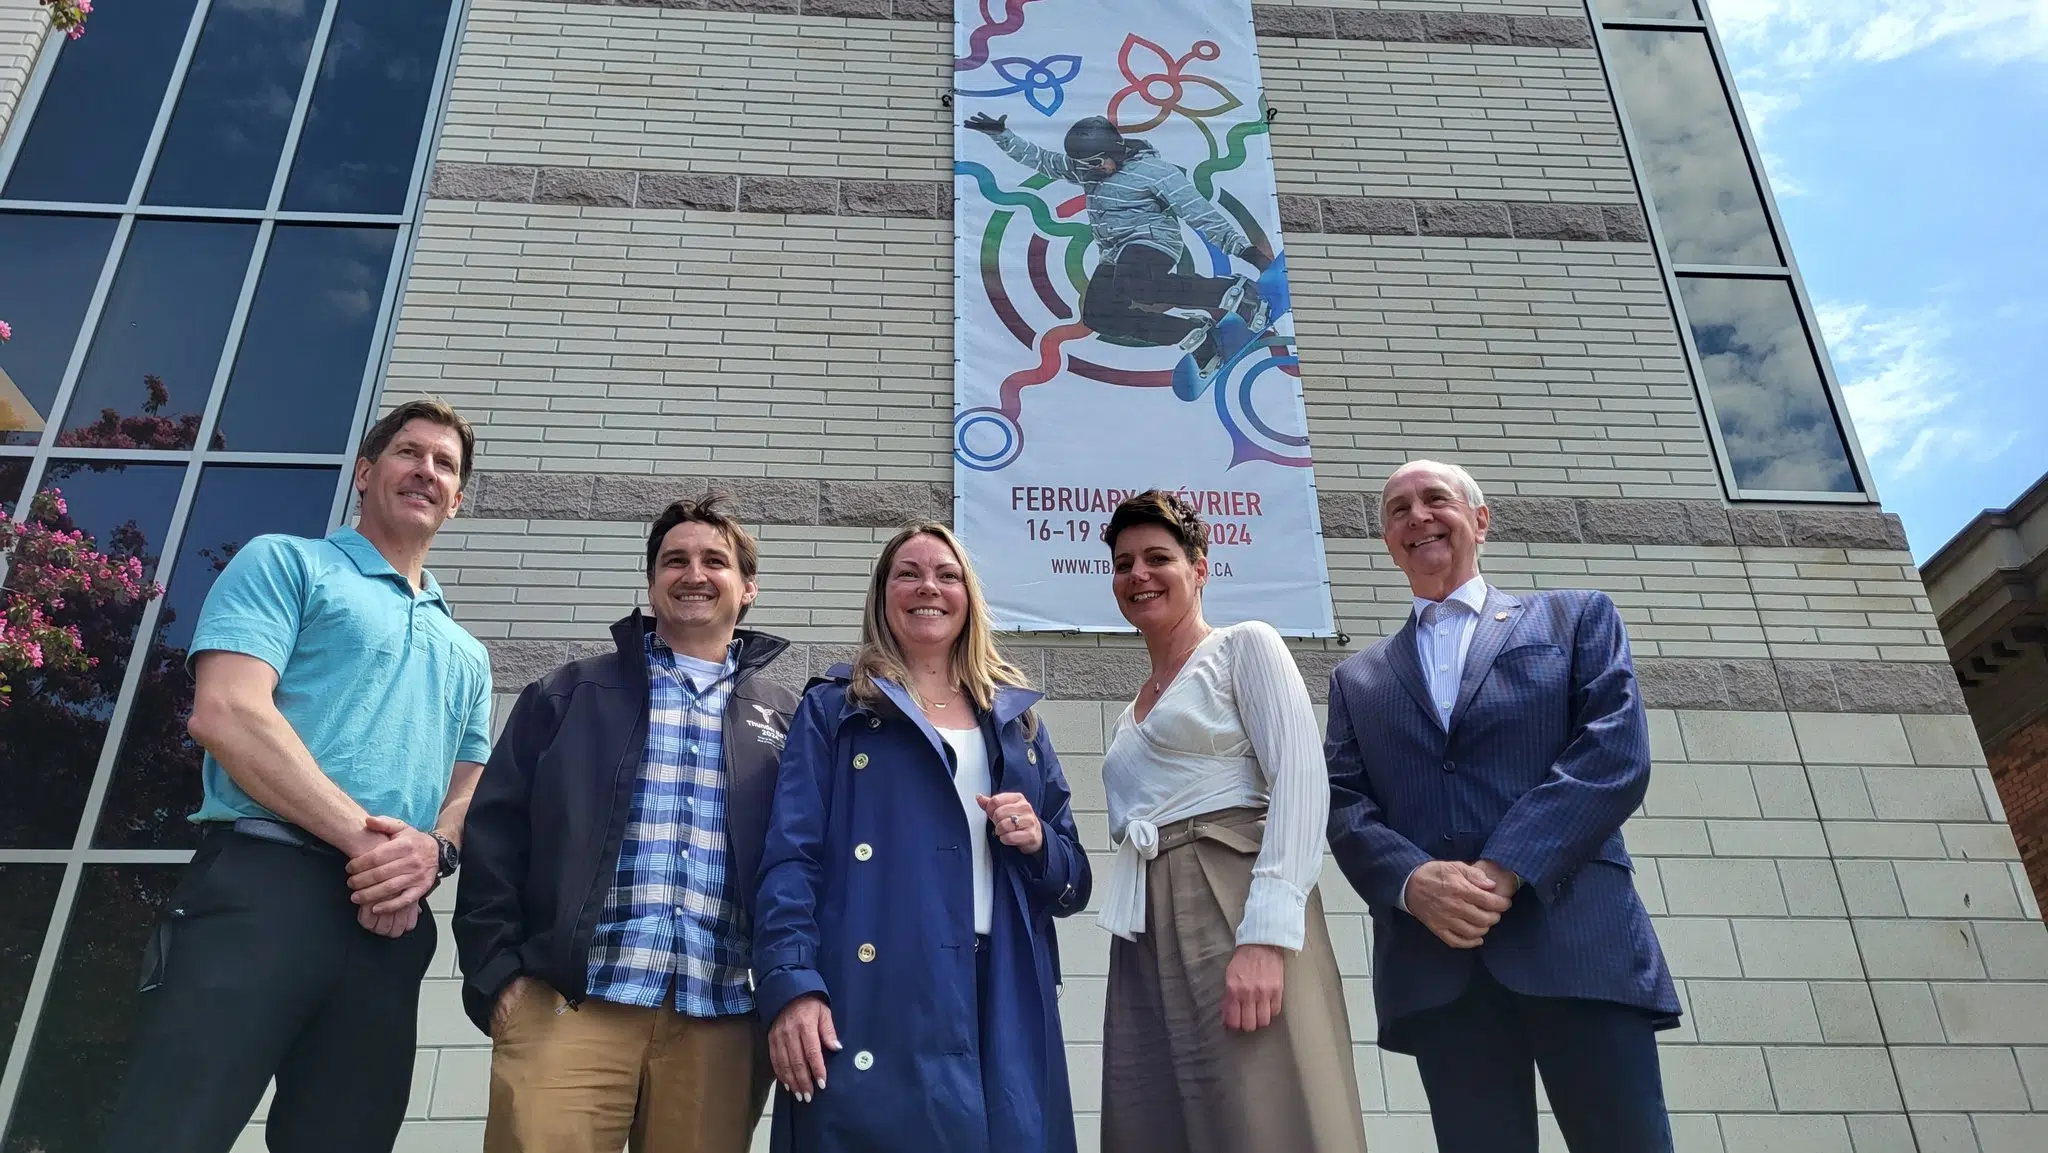 Hydro One to be presenting sponsor for 2024 Ontario Winter Games 99.9